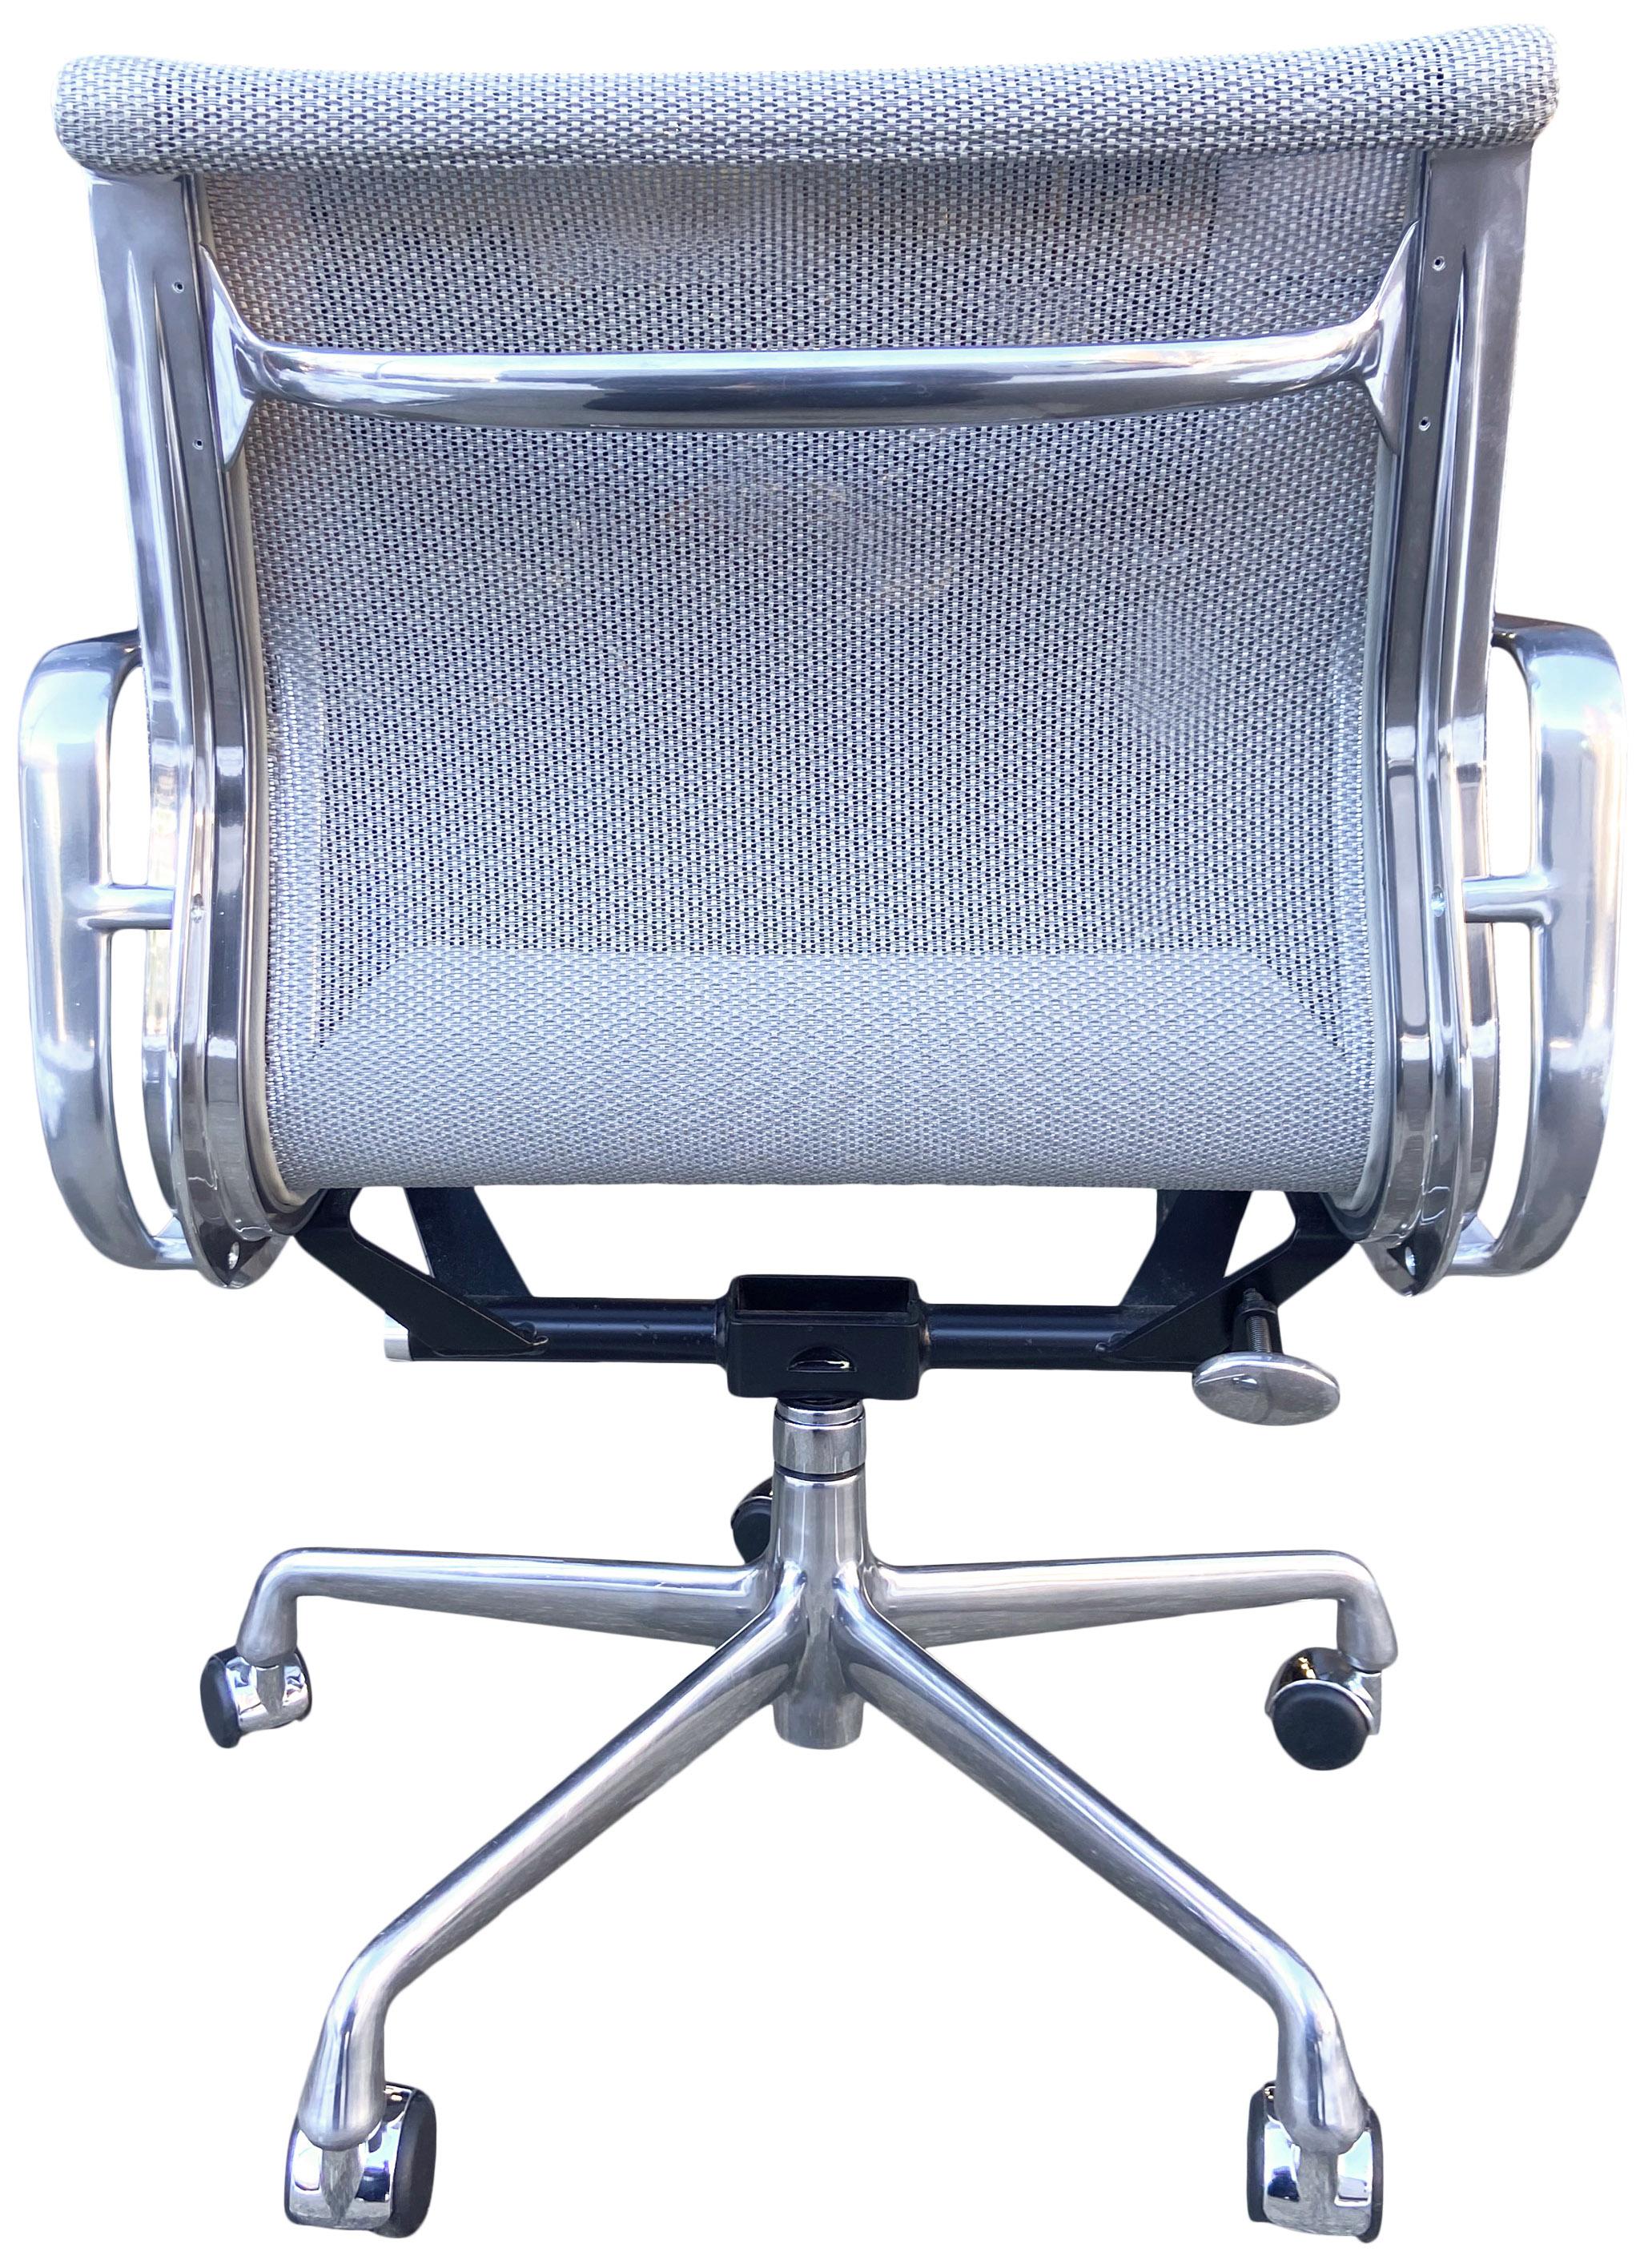 Eames Aluminum Group Chairs for Herman Miller 1